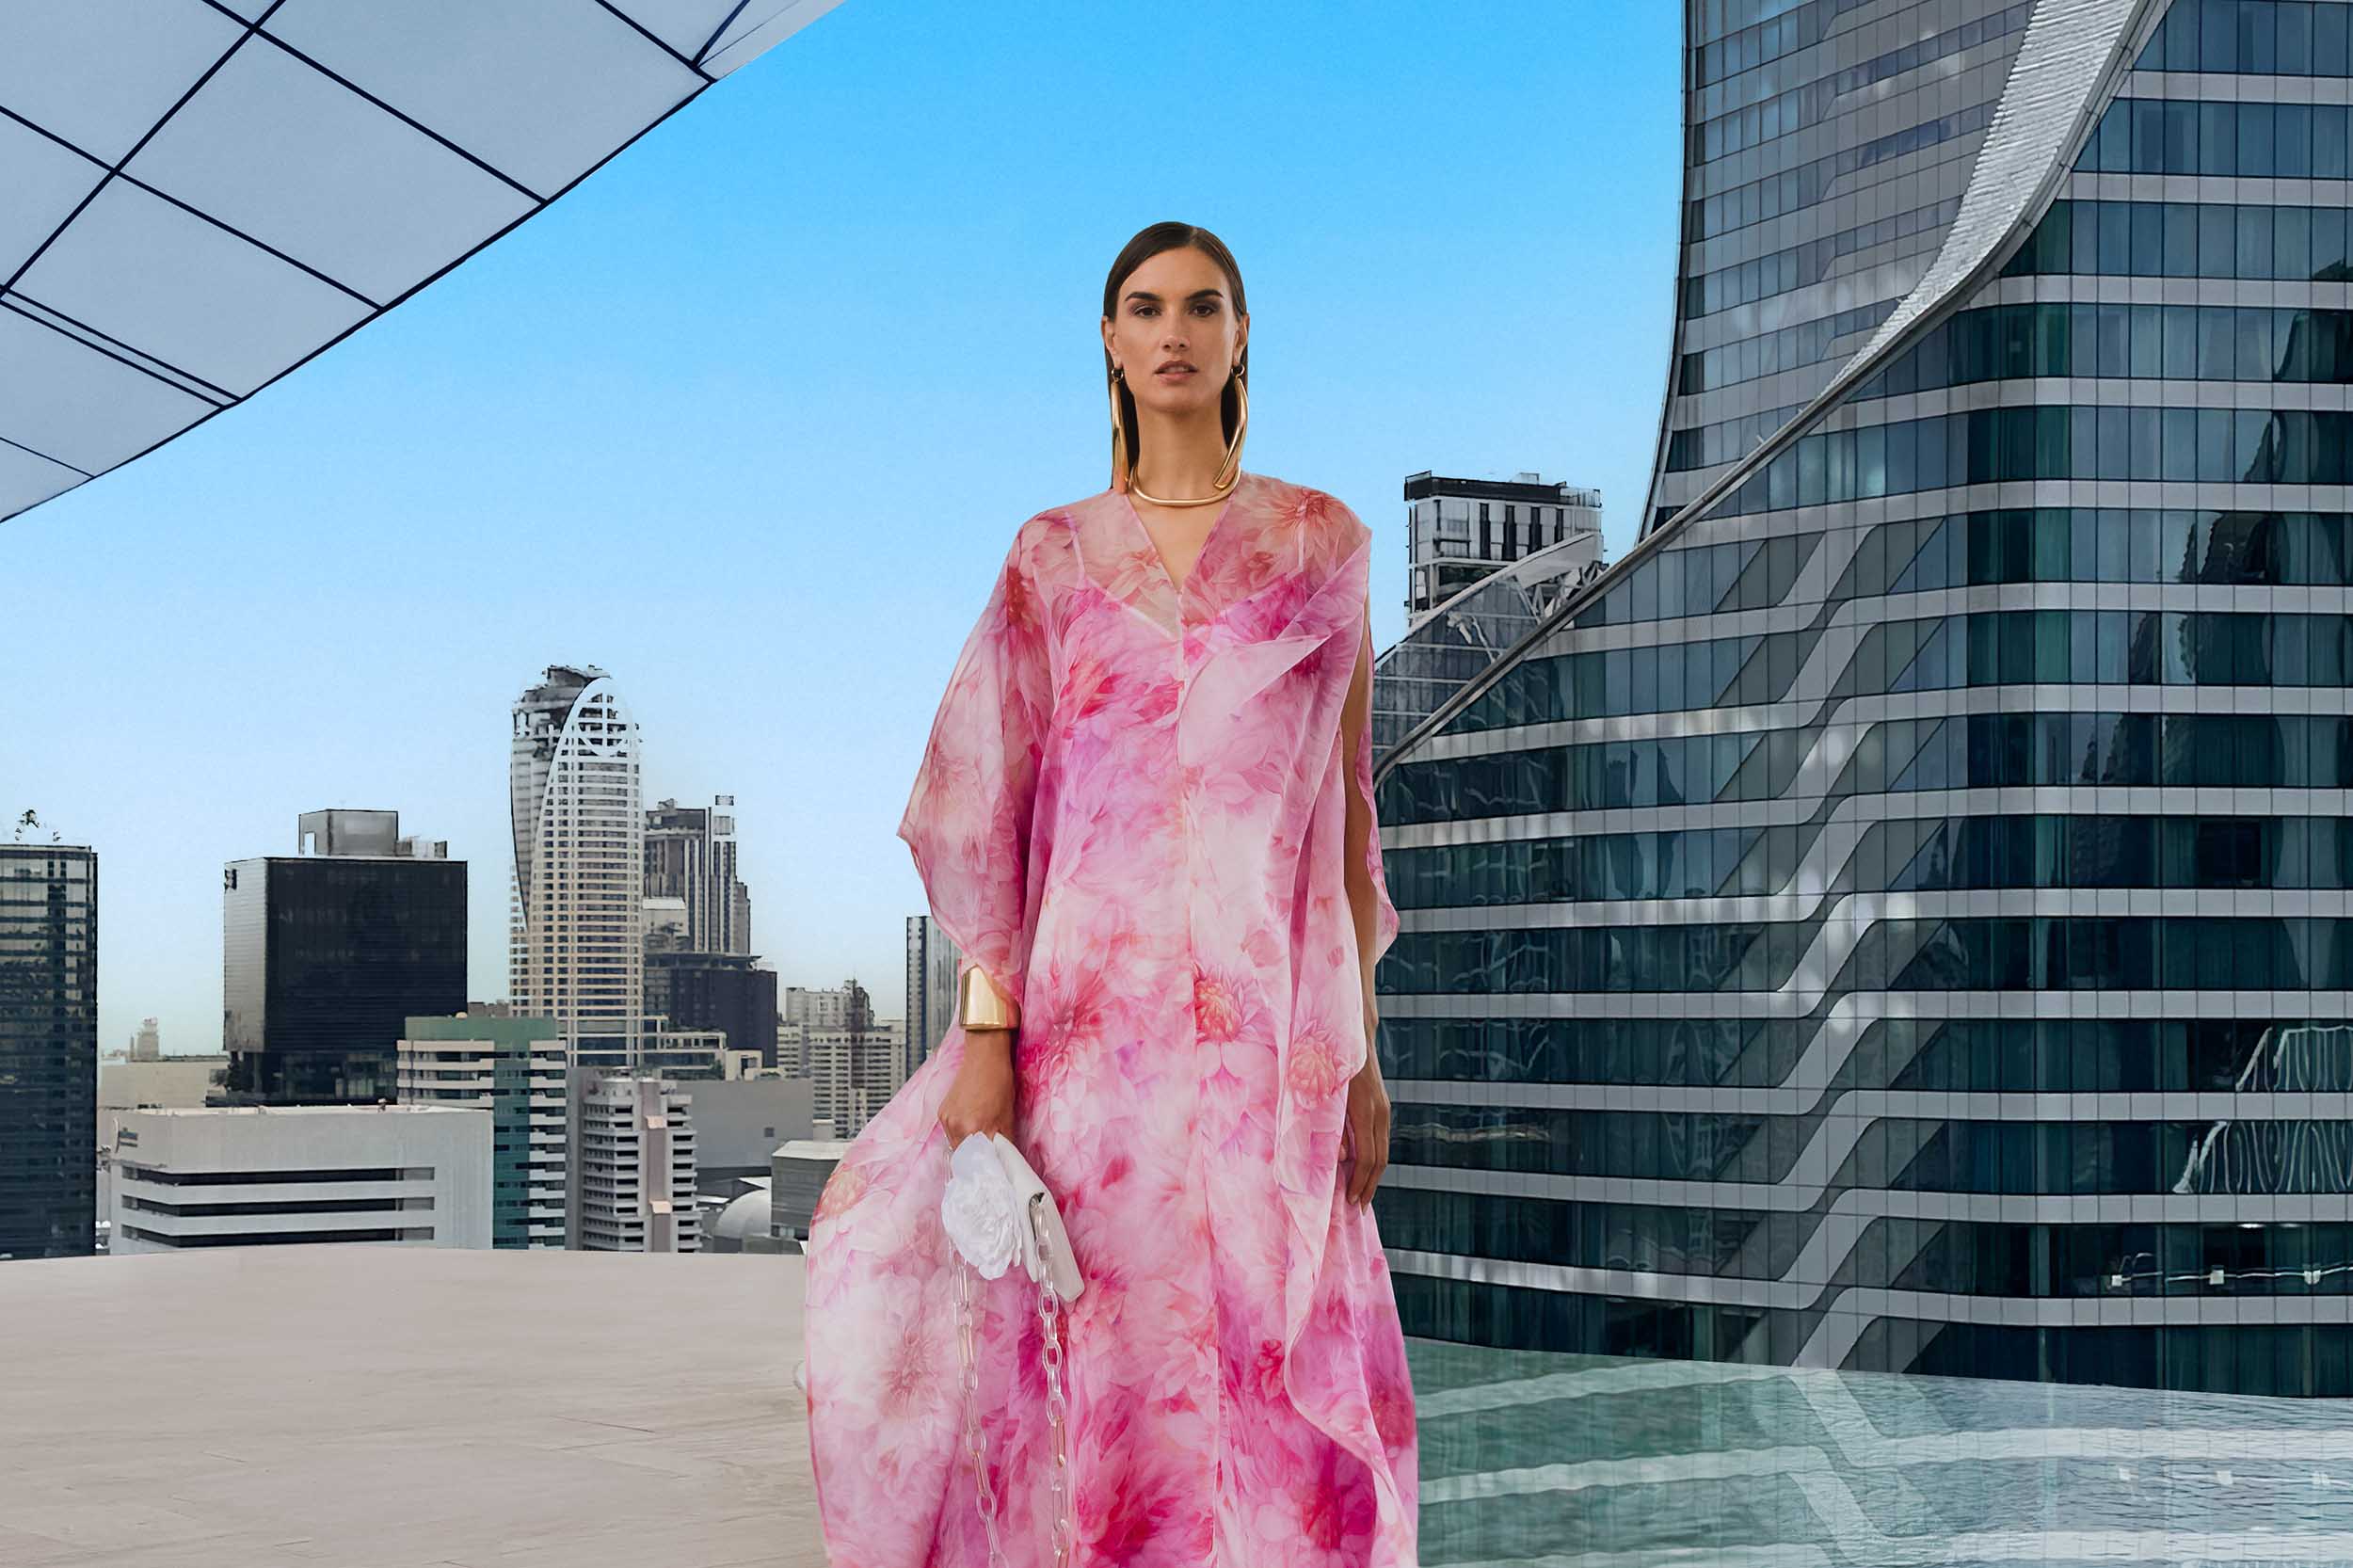 ESCADA MAINLINE INTRODUCES THE NEW SPRING / SUMMER 2024 CAMPAIGN